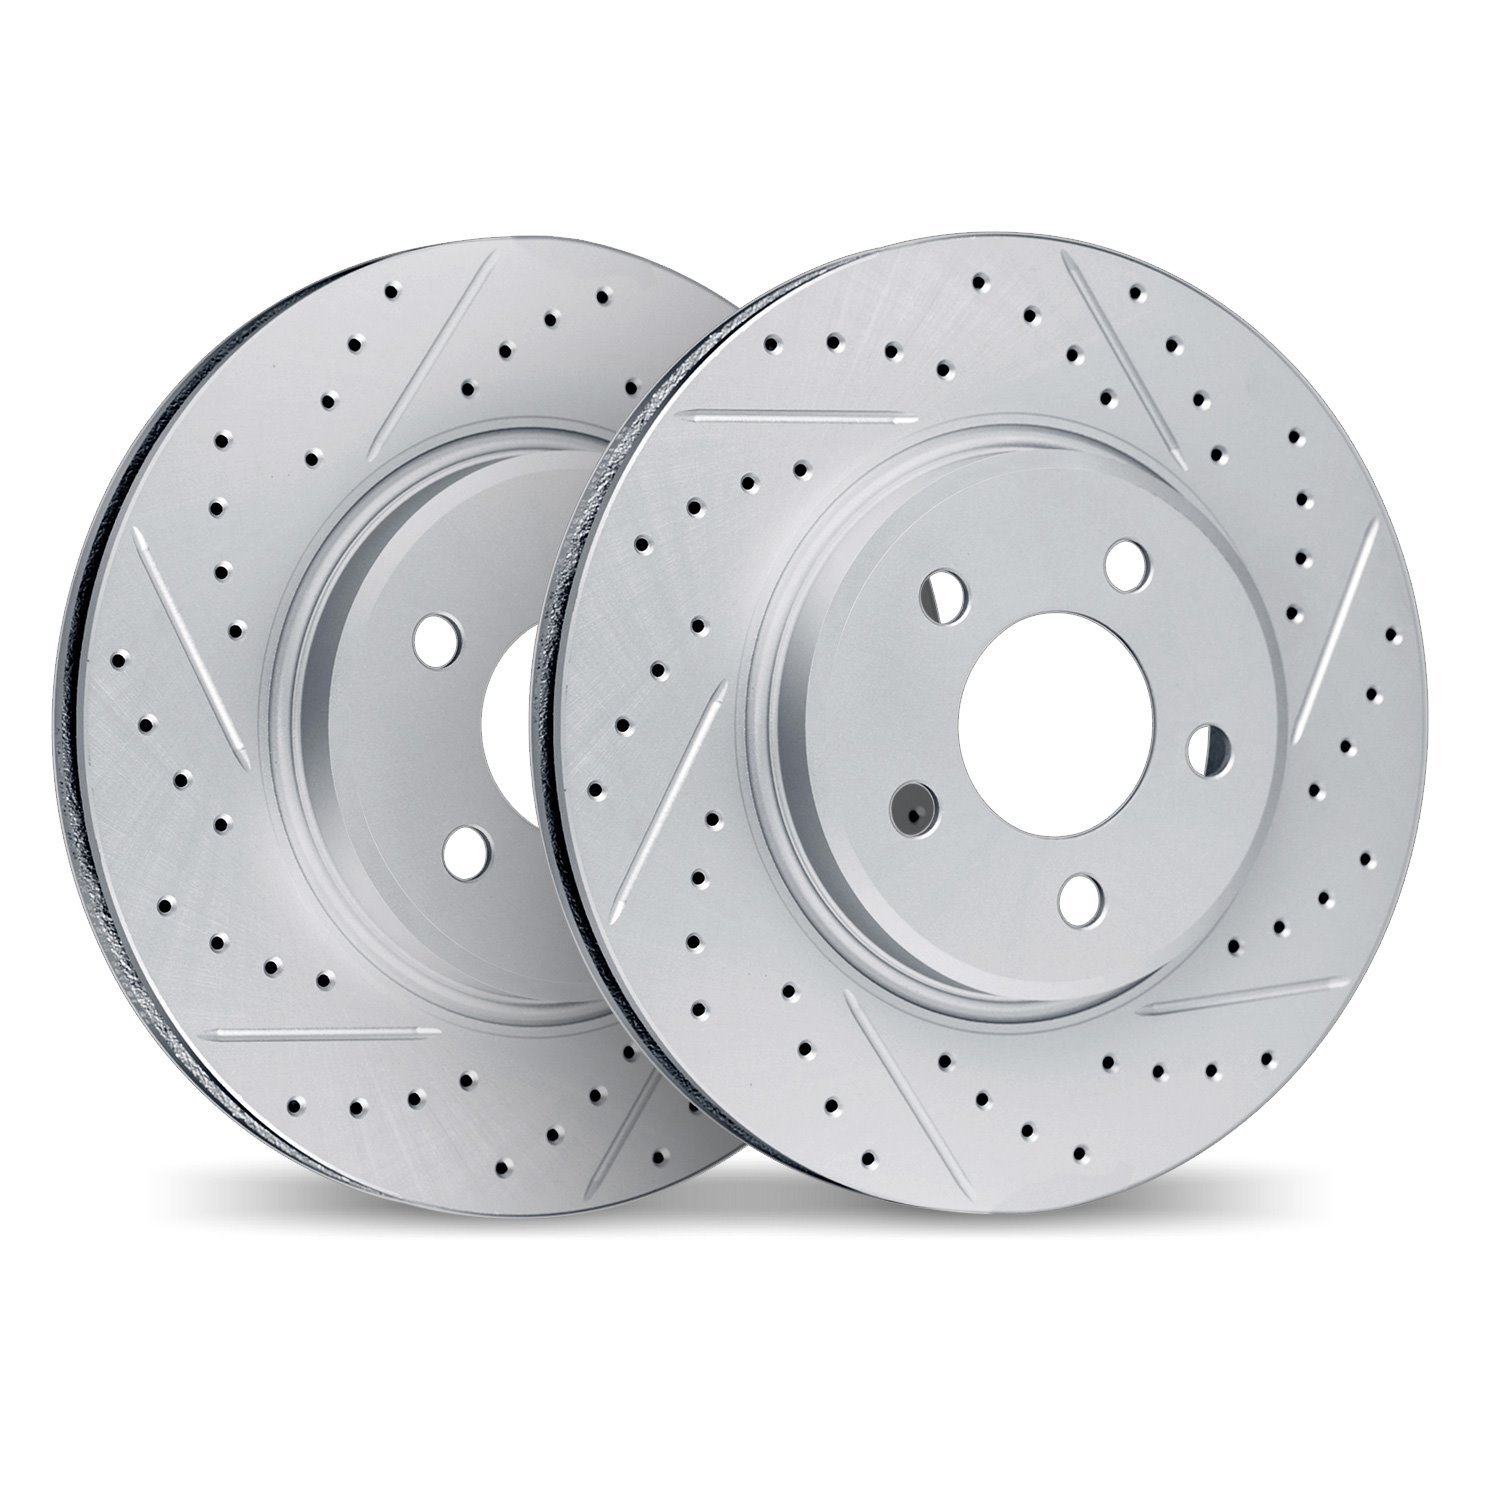 2002-11010 Geoperformance Drilled/Slotted Brake Rotors, 2003-2005 Land Rover, Position: Front